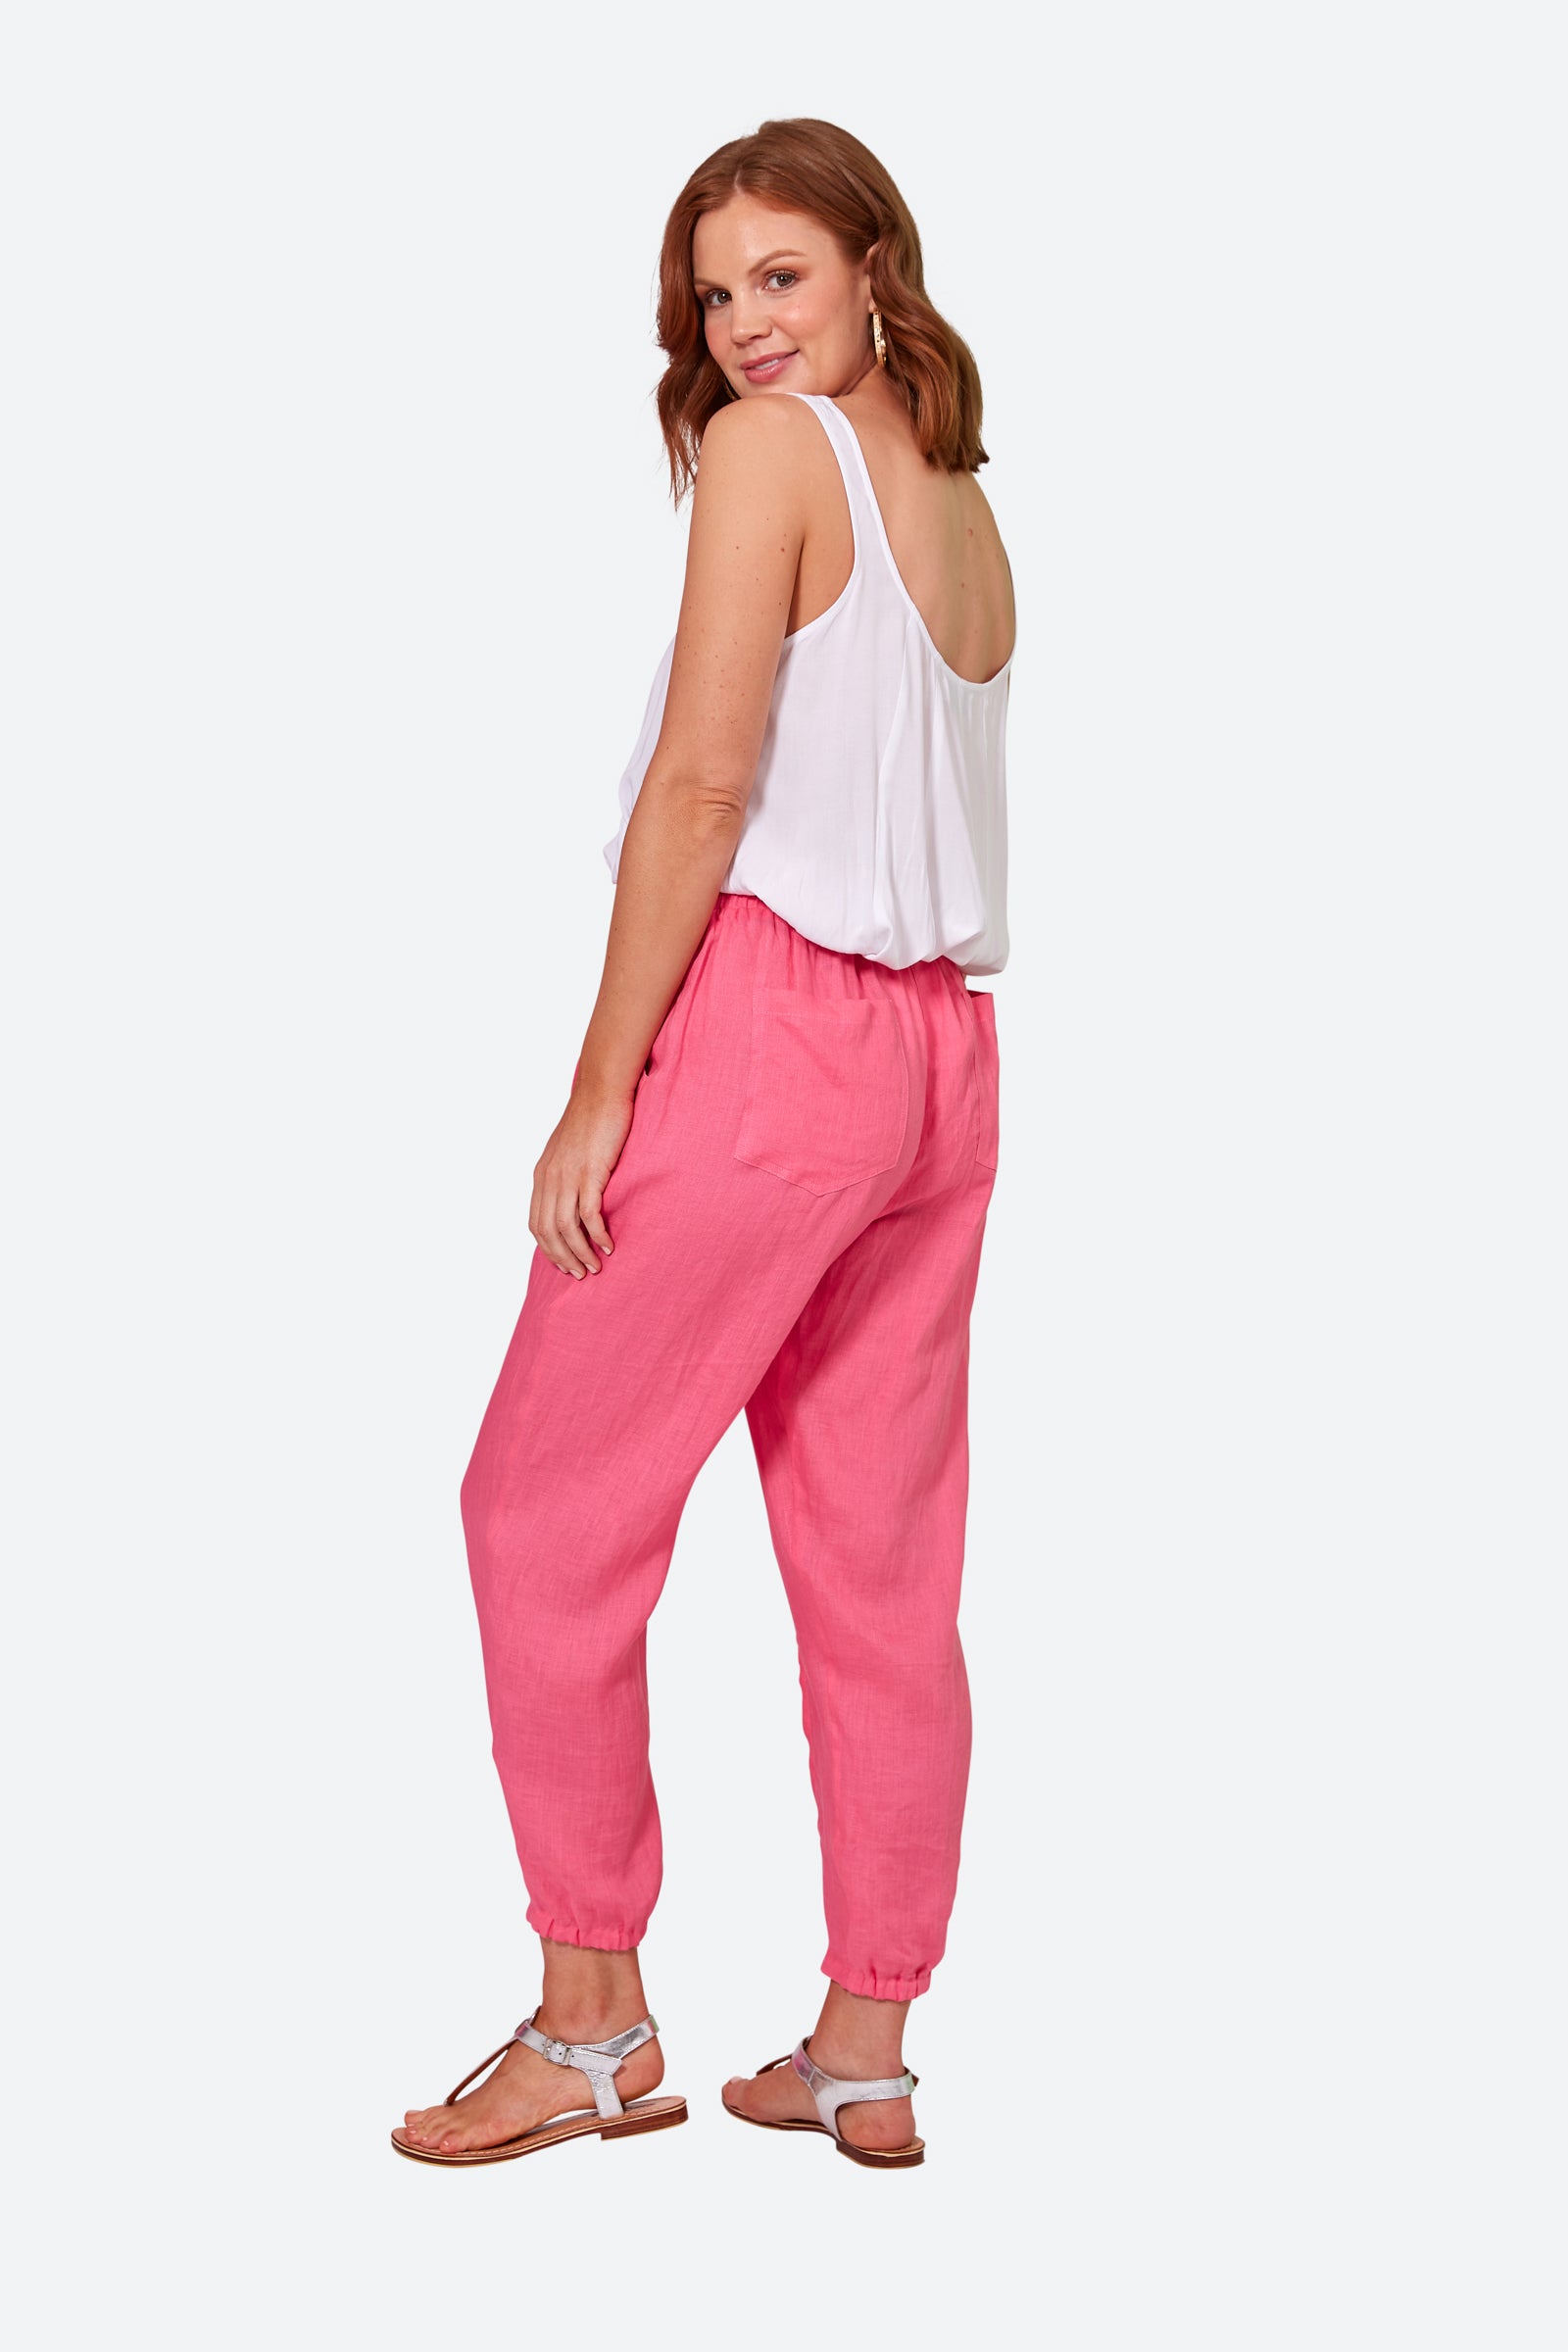 La Vie Pintuck Pant - Candy - eb&ive Clothing - Pant Relaxed Linen